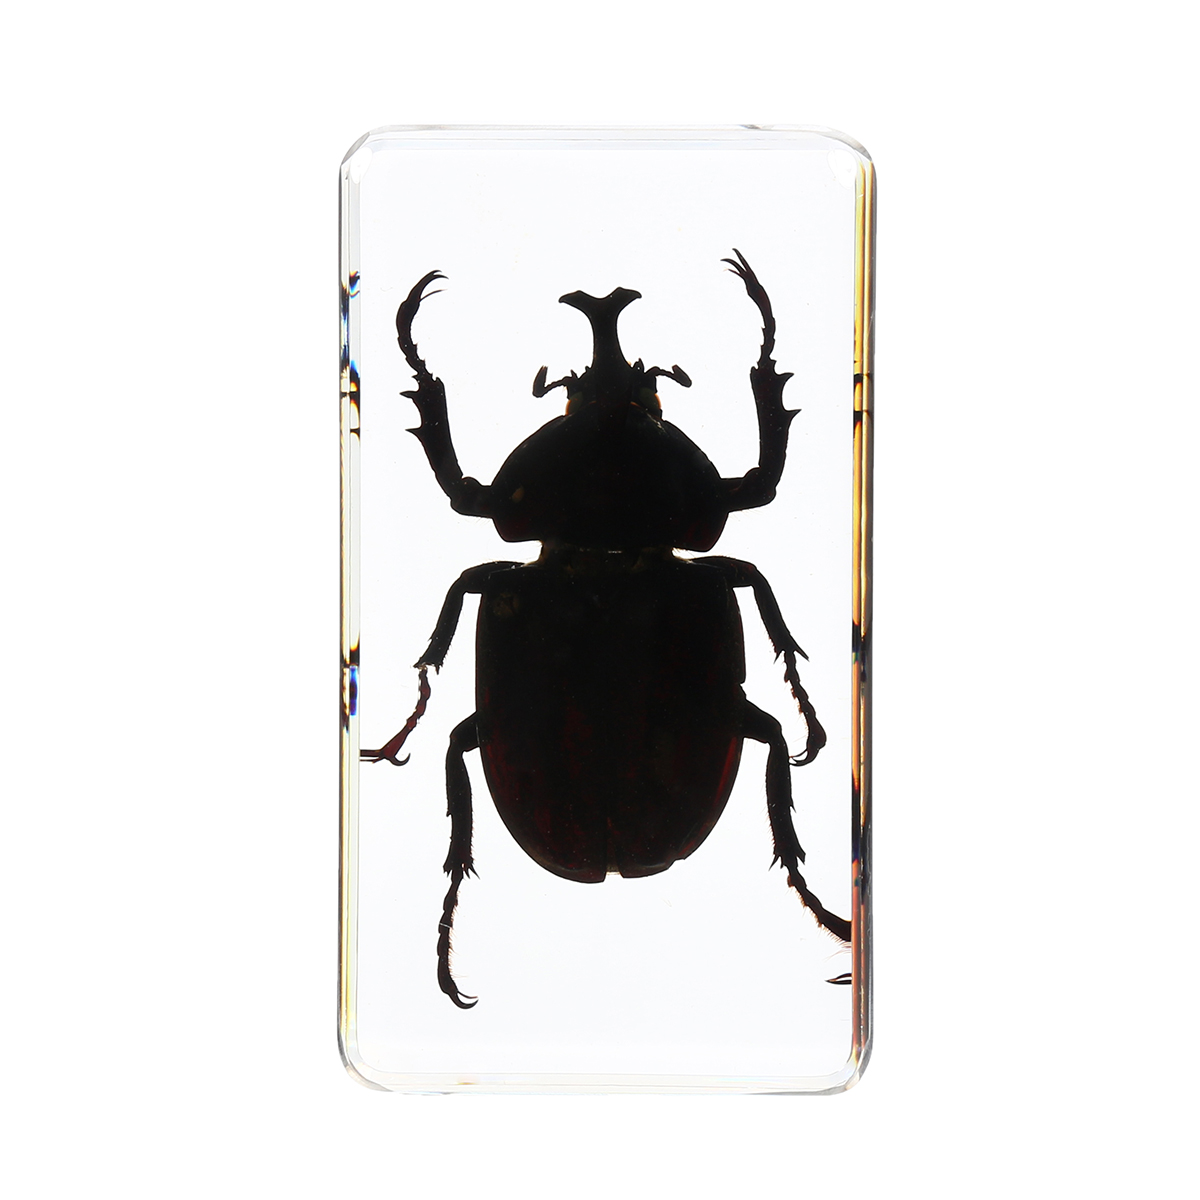 Clear-Acrylic-Lucite-Insect-Specimen-Spider-Black-Longhorn-Beetle-Scorpions-Craft-Science-Toy-1328098-4